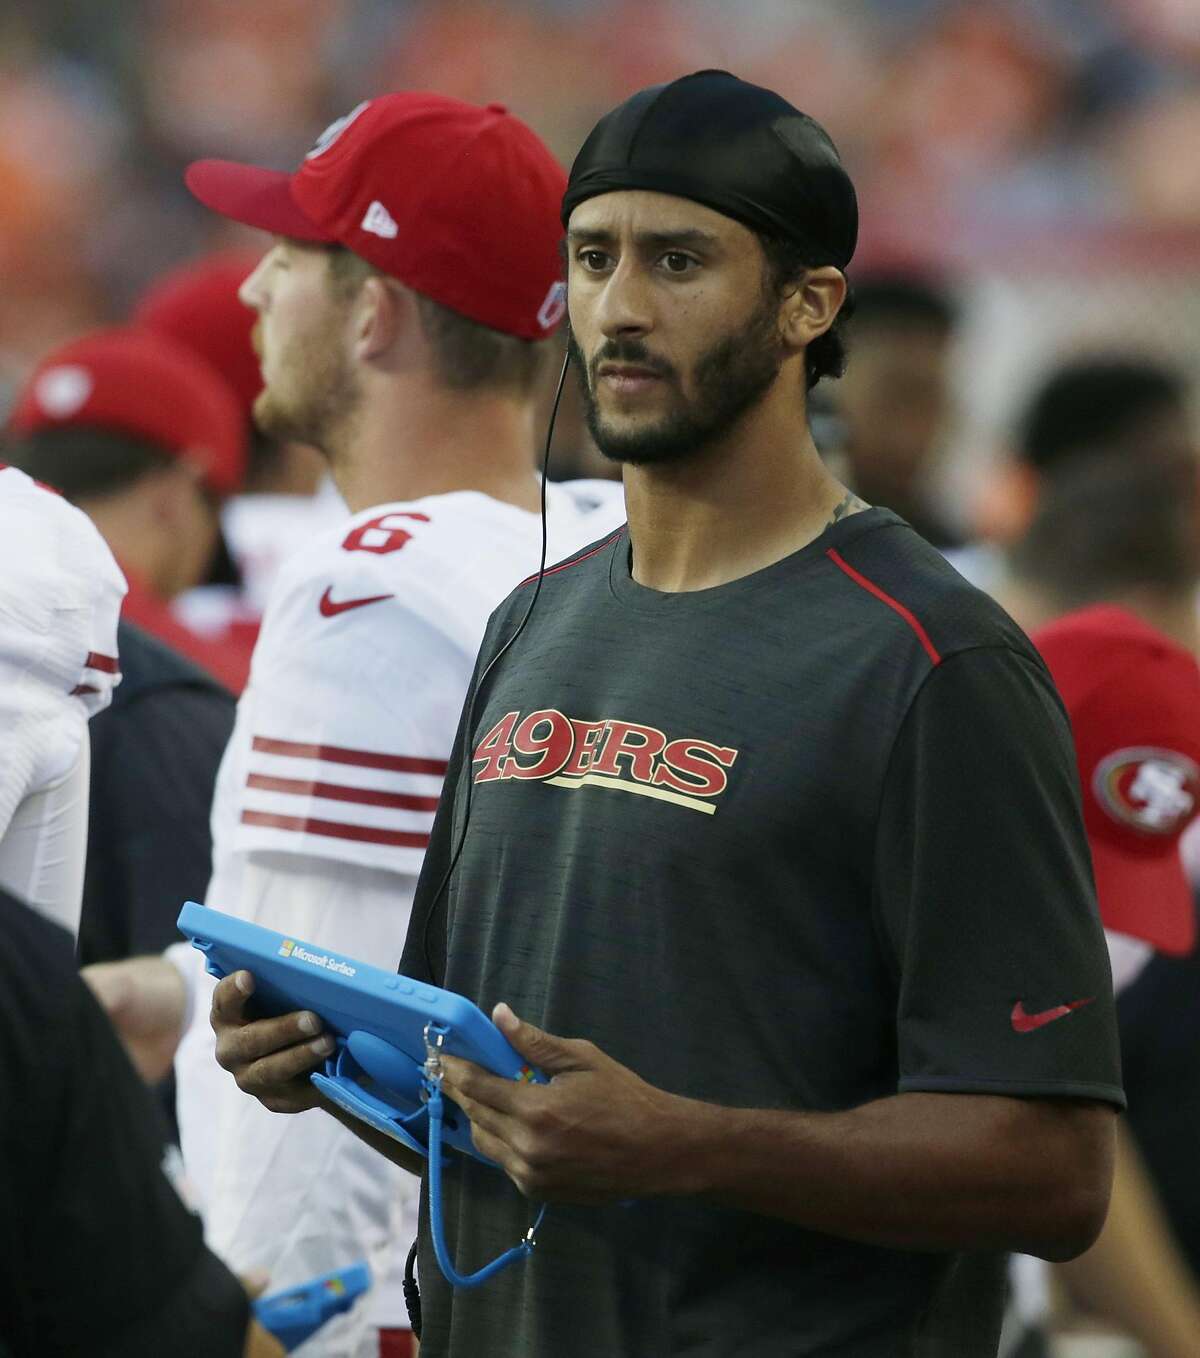 San Francisco 49ers quarterback Colin Kaepernick holds a tablet computer as he stands on the sideline during the first half of a preseason NFL football game against the Denver Broncos, Saturday, Aug. 20, 2016, in Denver. (AP Photo/Joe Mahoney)